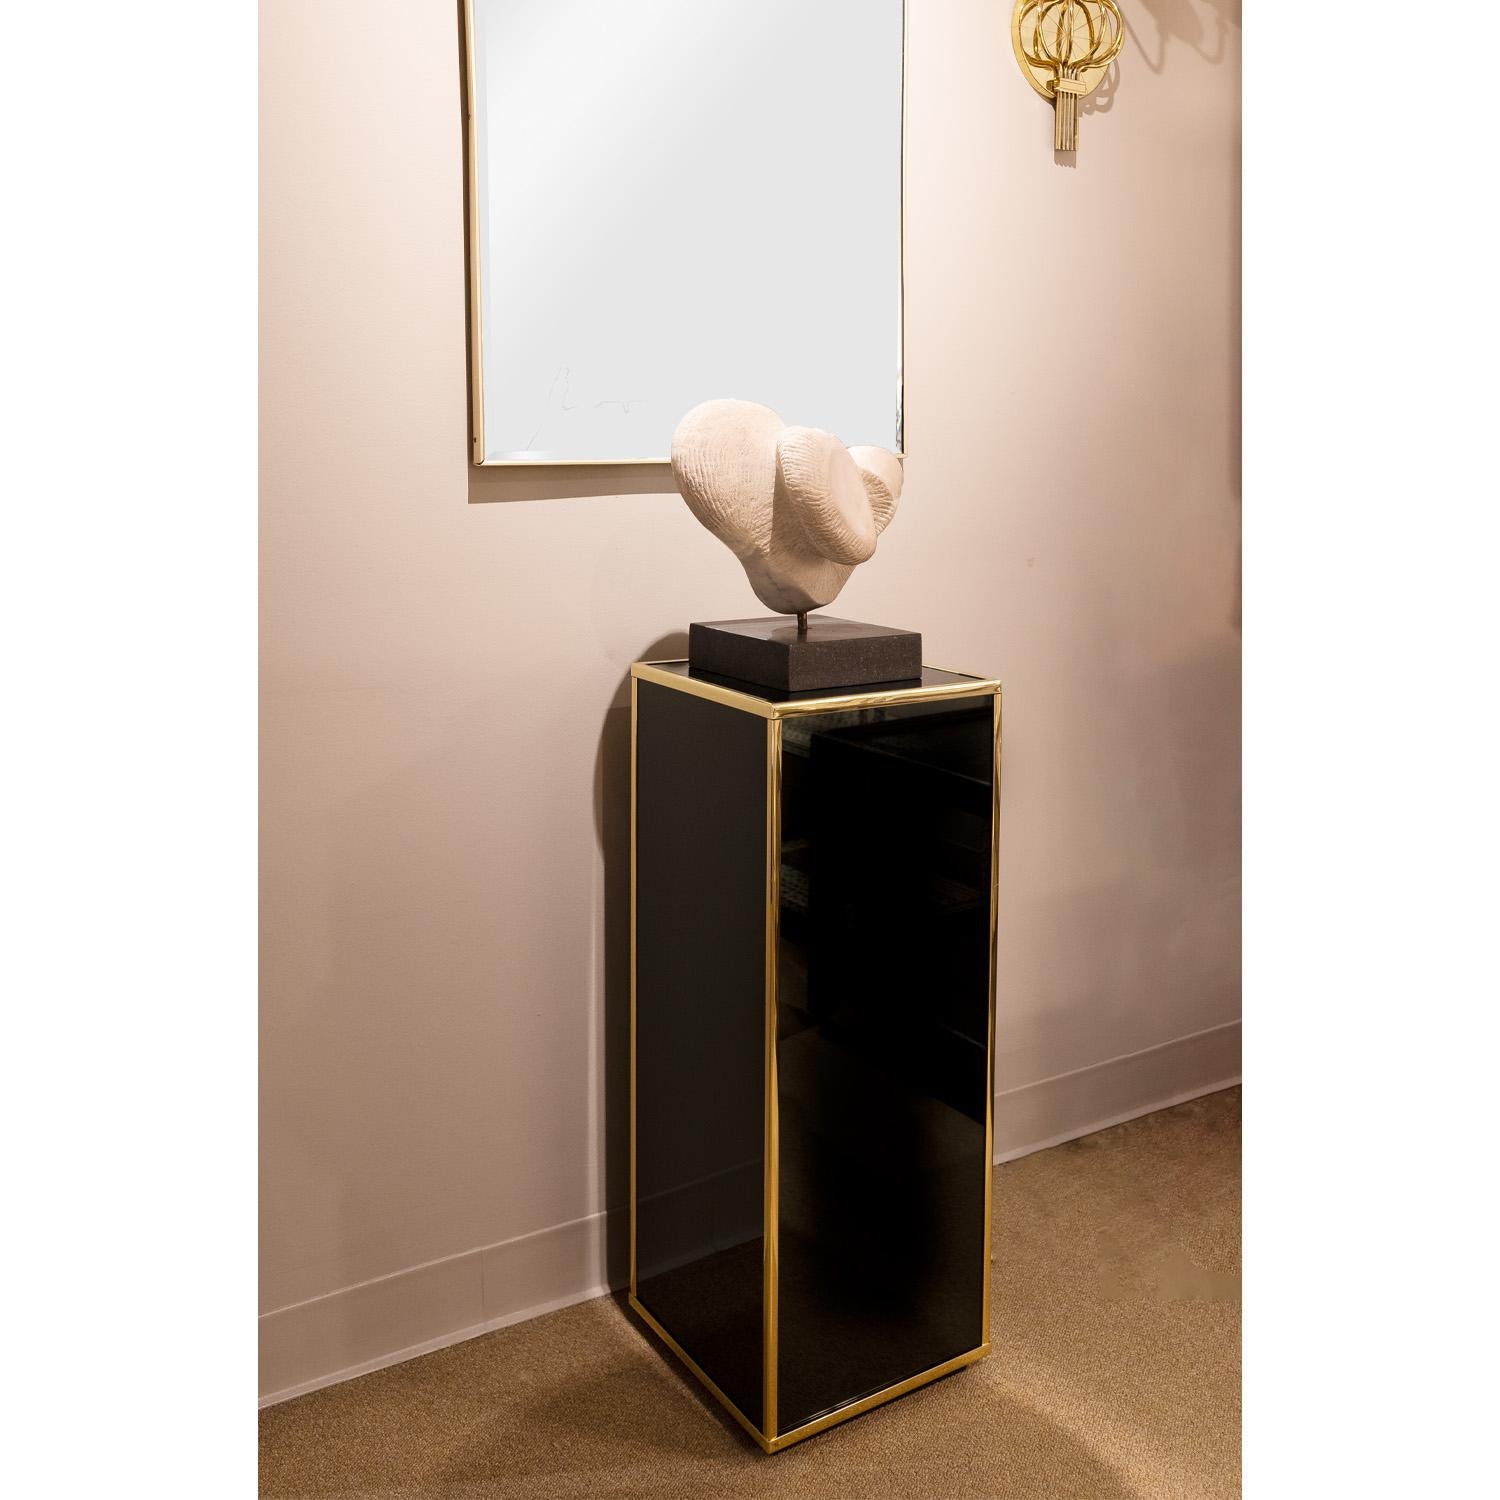 Hand-Crafted Saporiti Pedestal in Black Lucite with Brass Trim 1970s For Sale